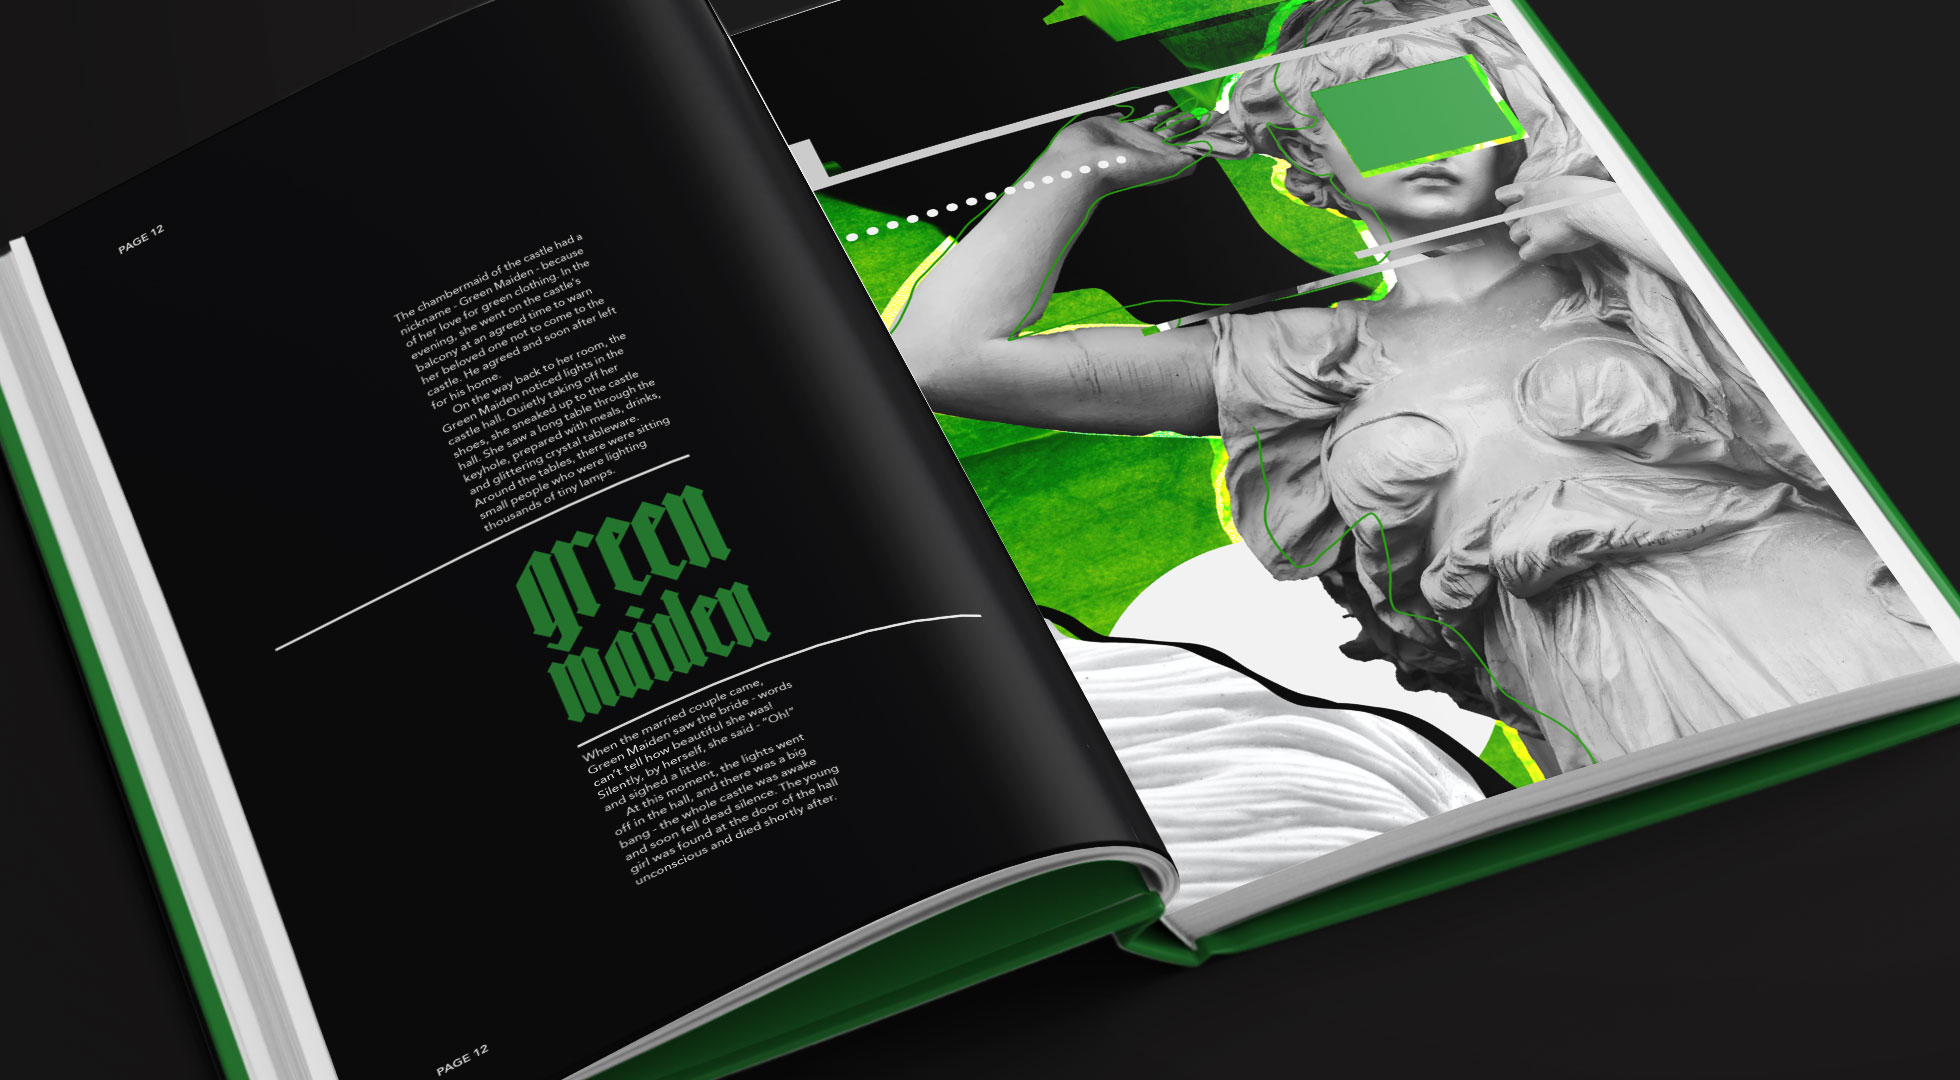 A modern double-page editorial design titled Green Maiden with an image of a woman's statue. A page from the "Legend, Myth, or Truth? Book.